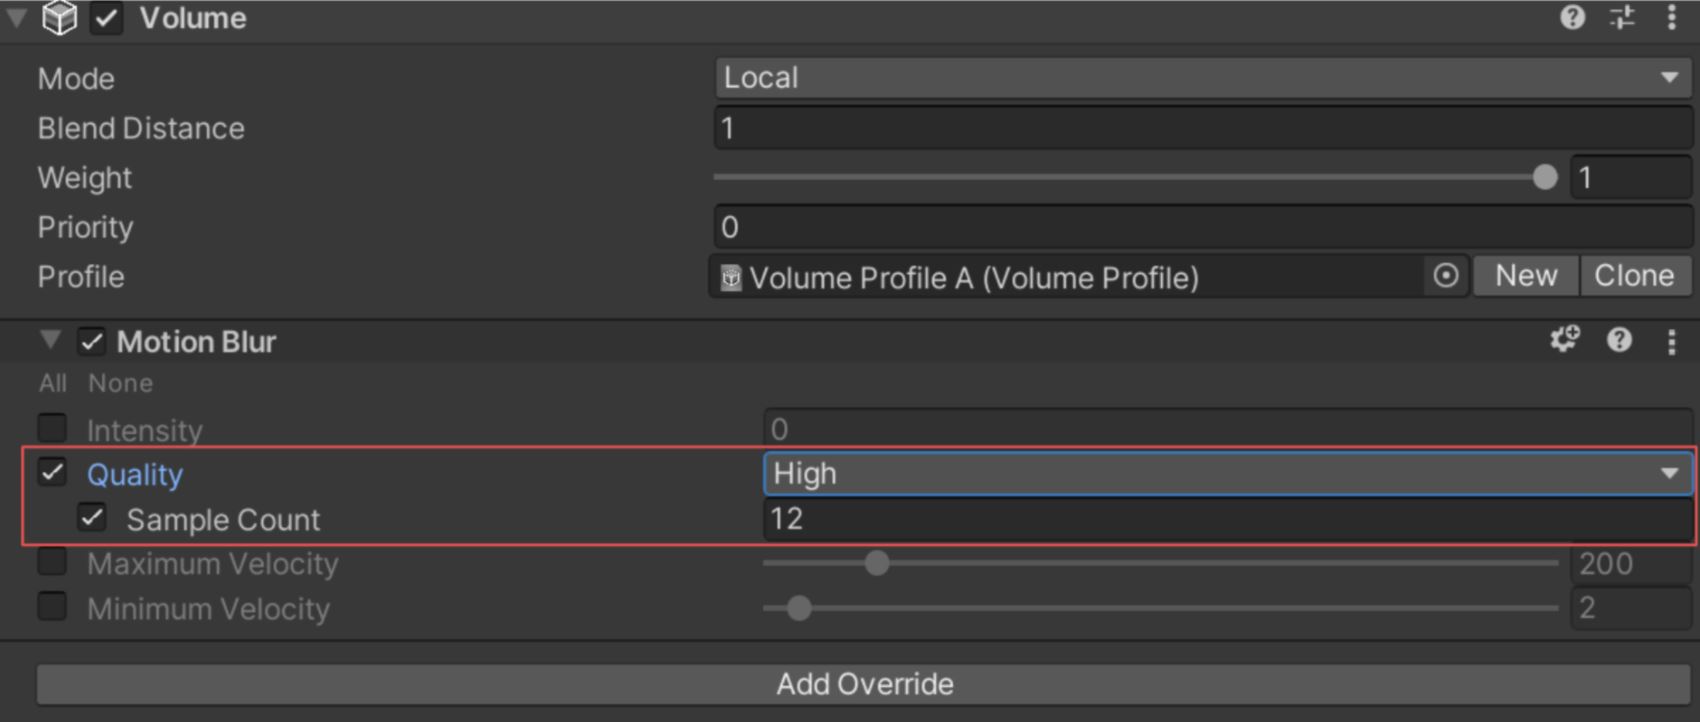 Specify tiers rather than values.